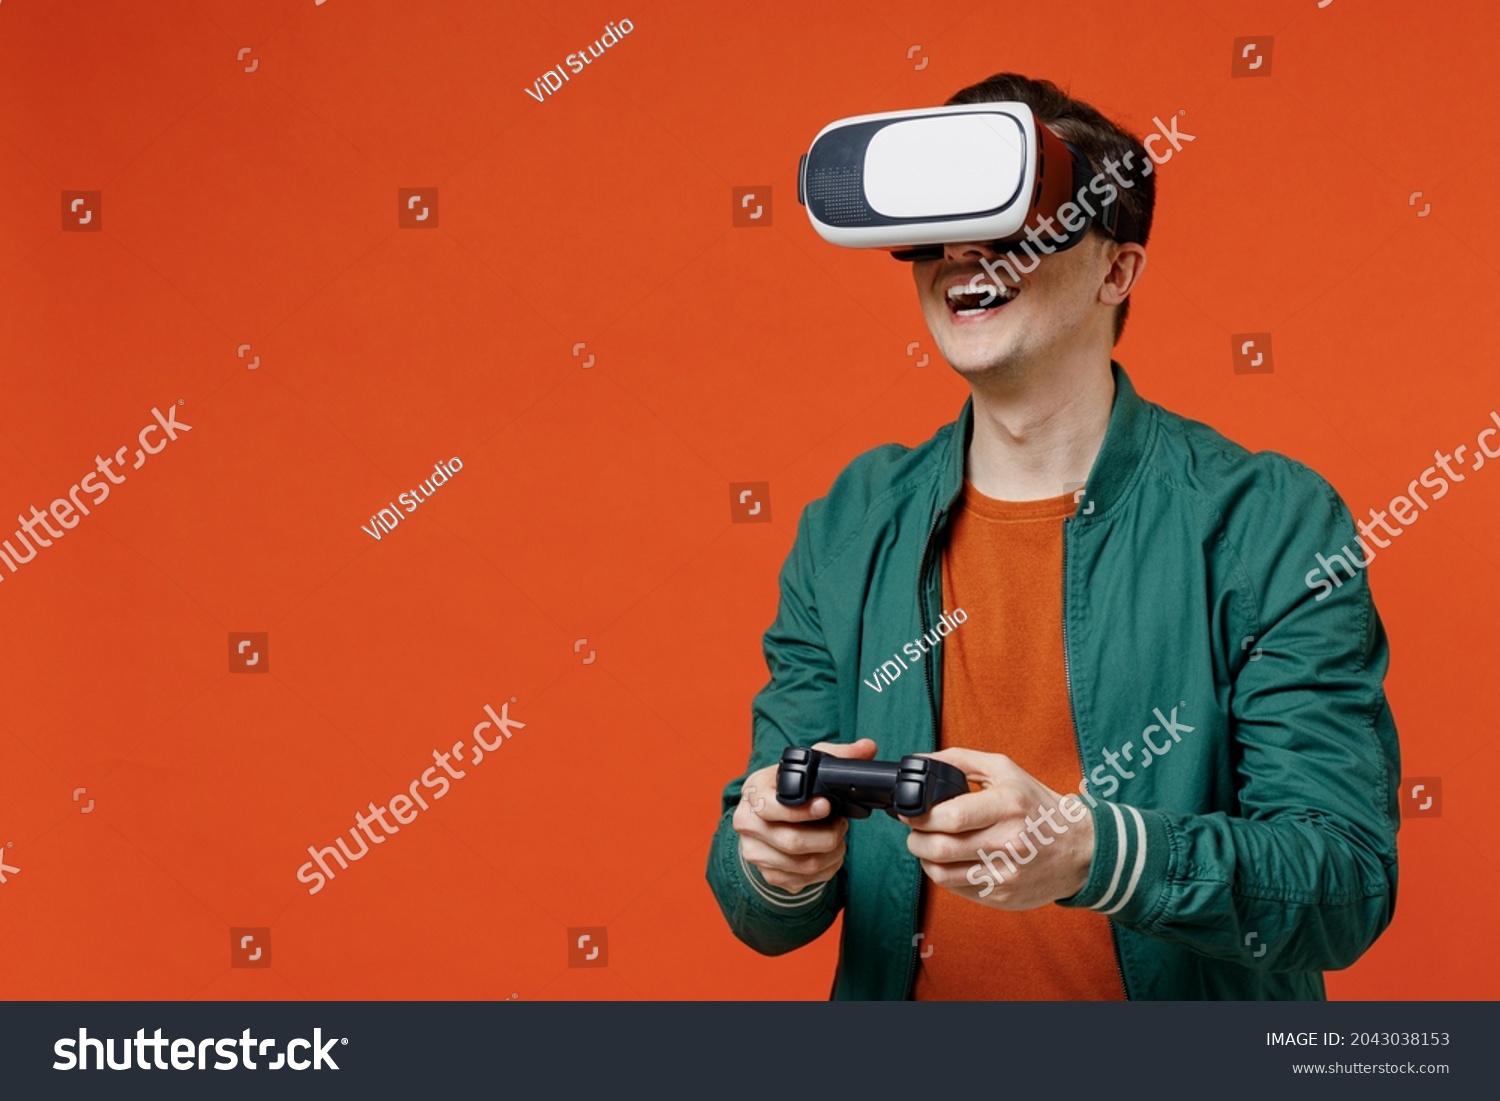 Smiling vivid excited happy young brunet man 20s wear red t-shirt green jacket watching in vr headset pc gadget play pc game with joystick console isolated on plain orange background studio portrait. #2043038153